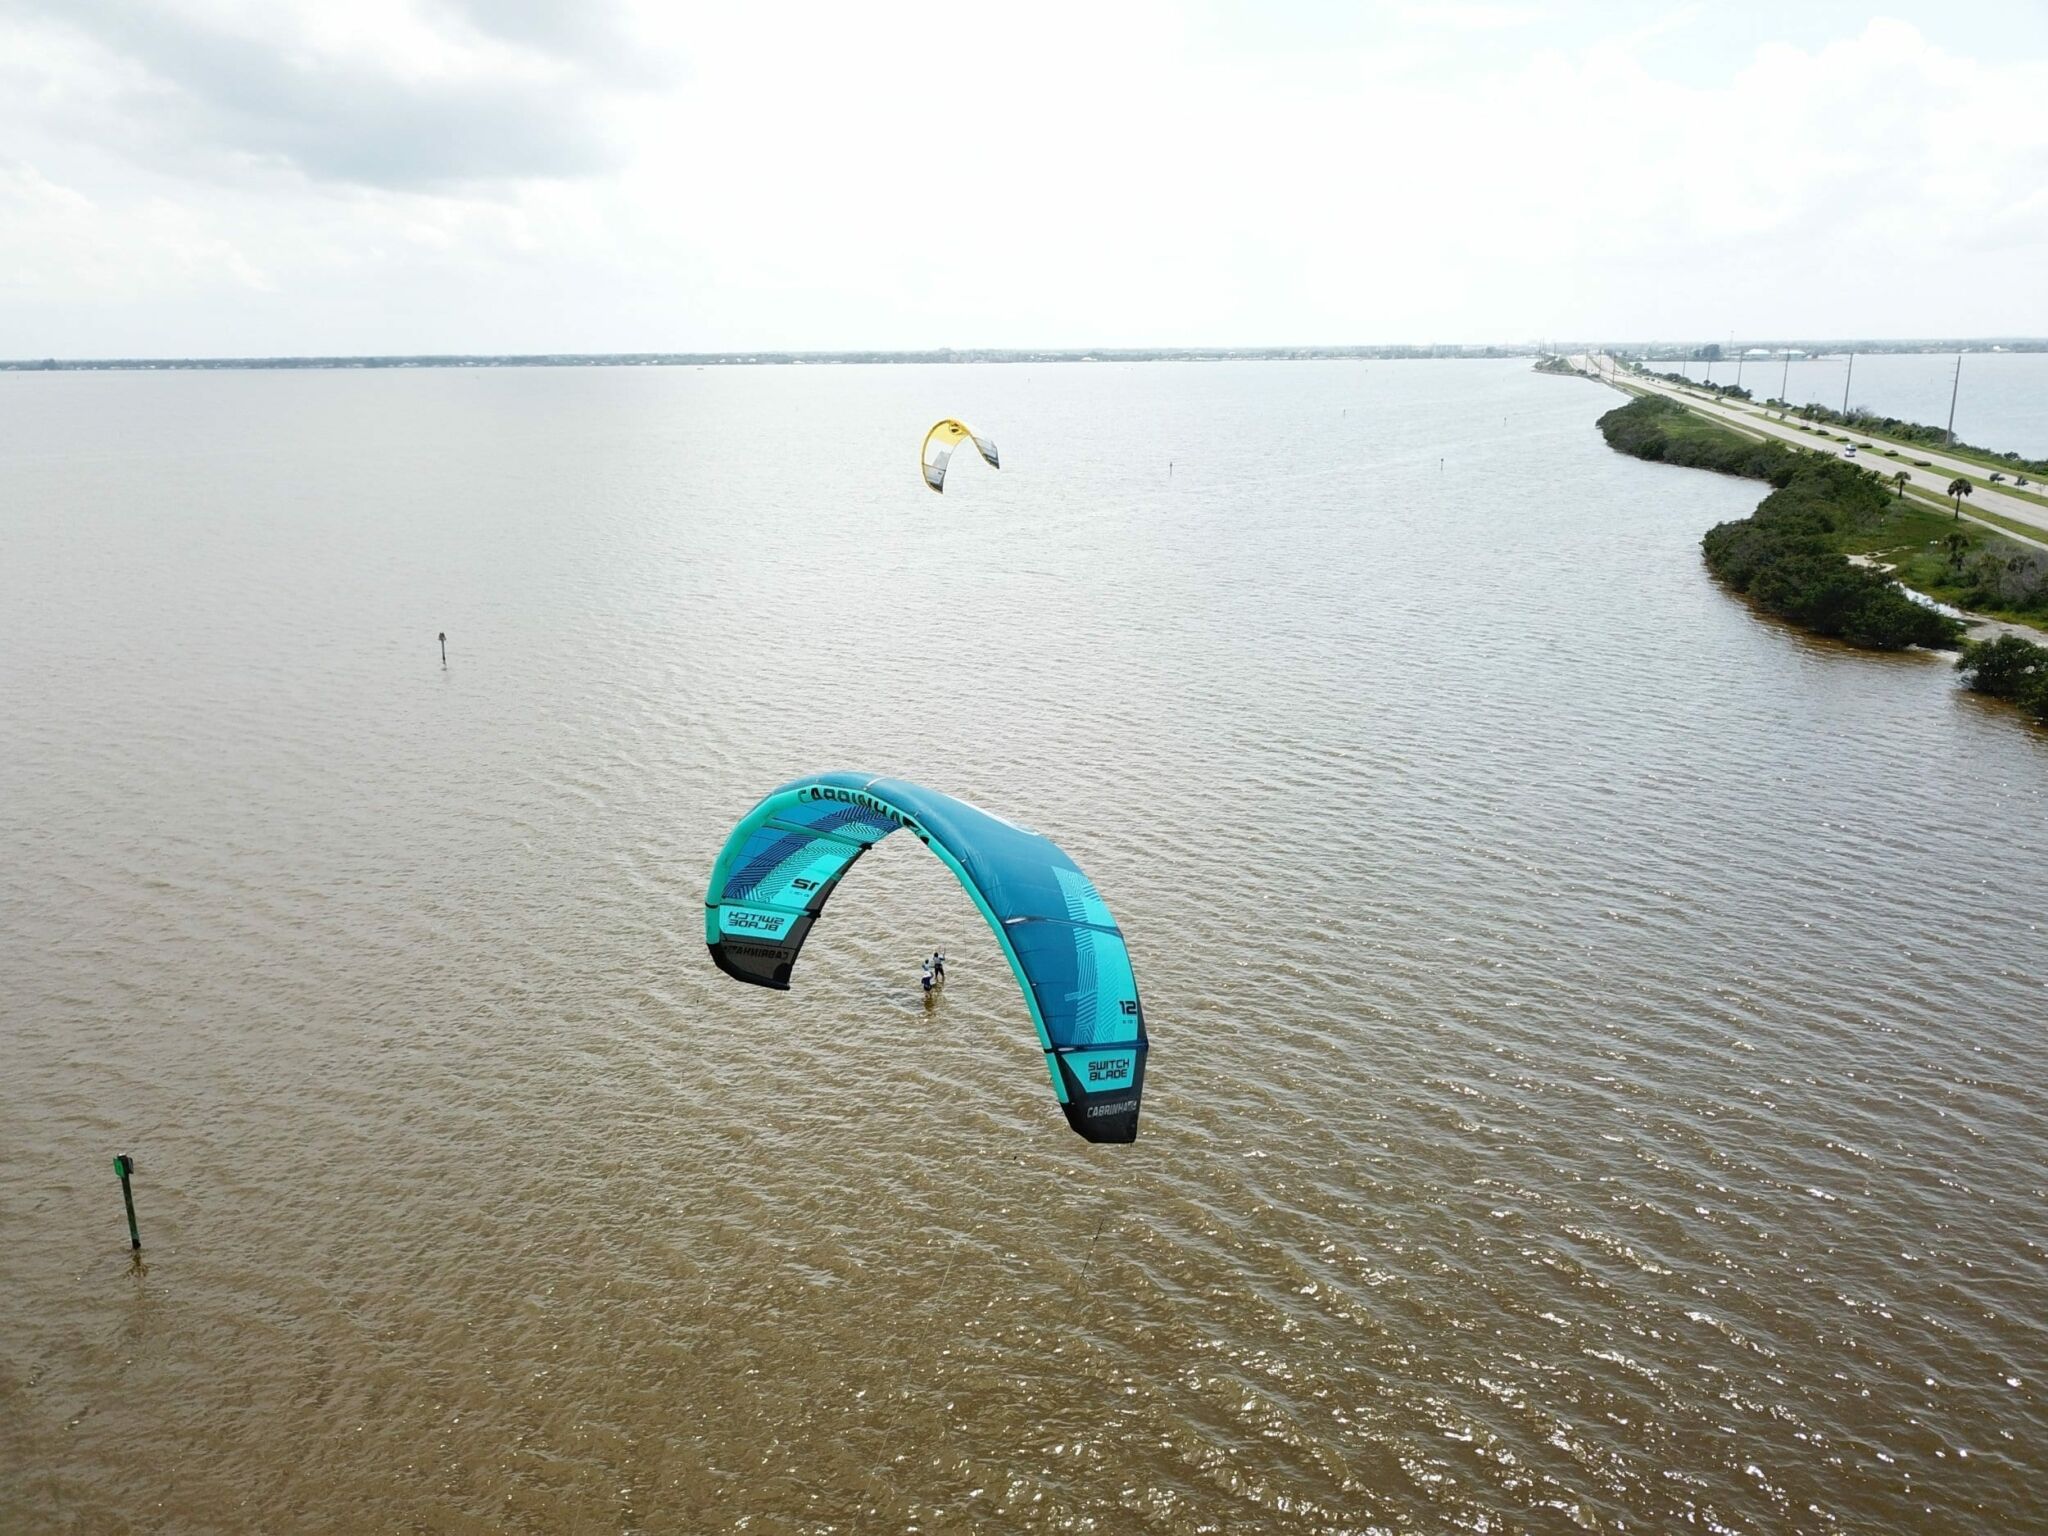 Hourly Kiteboarding Lessons in Cocoa Beach, FL